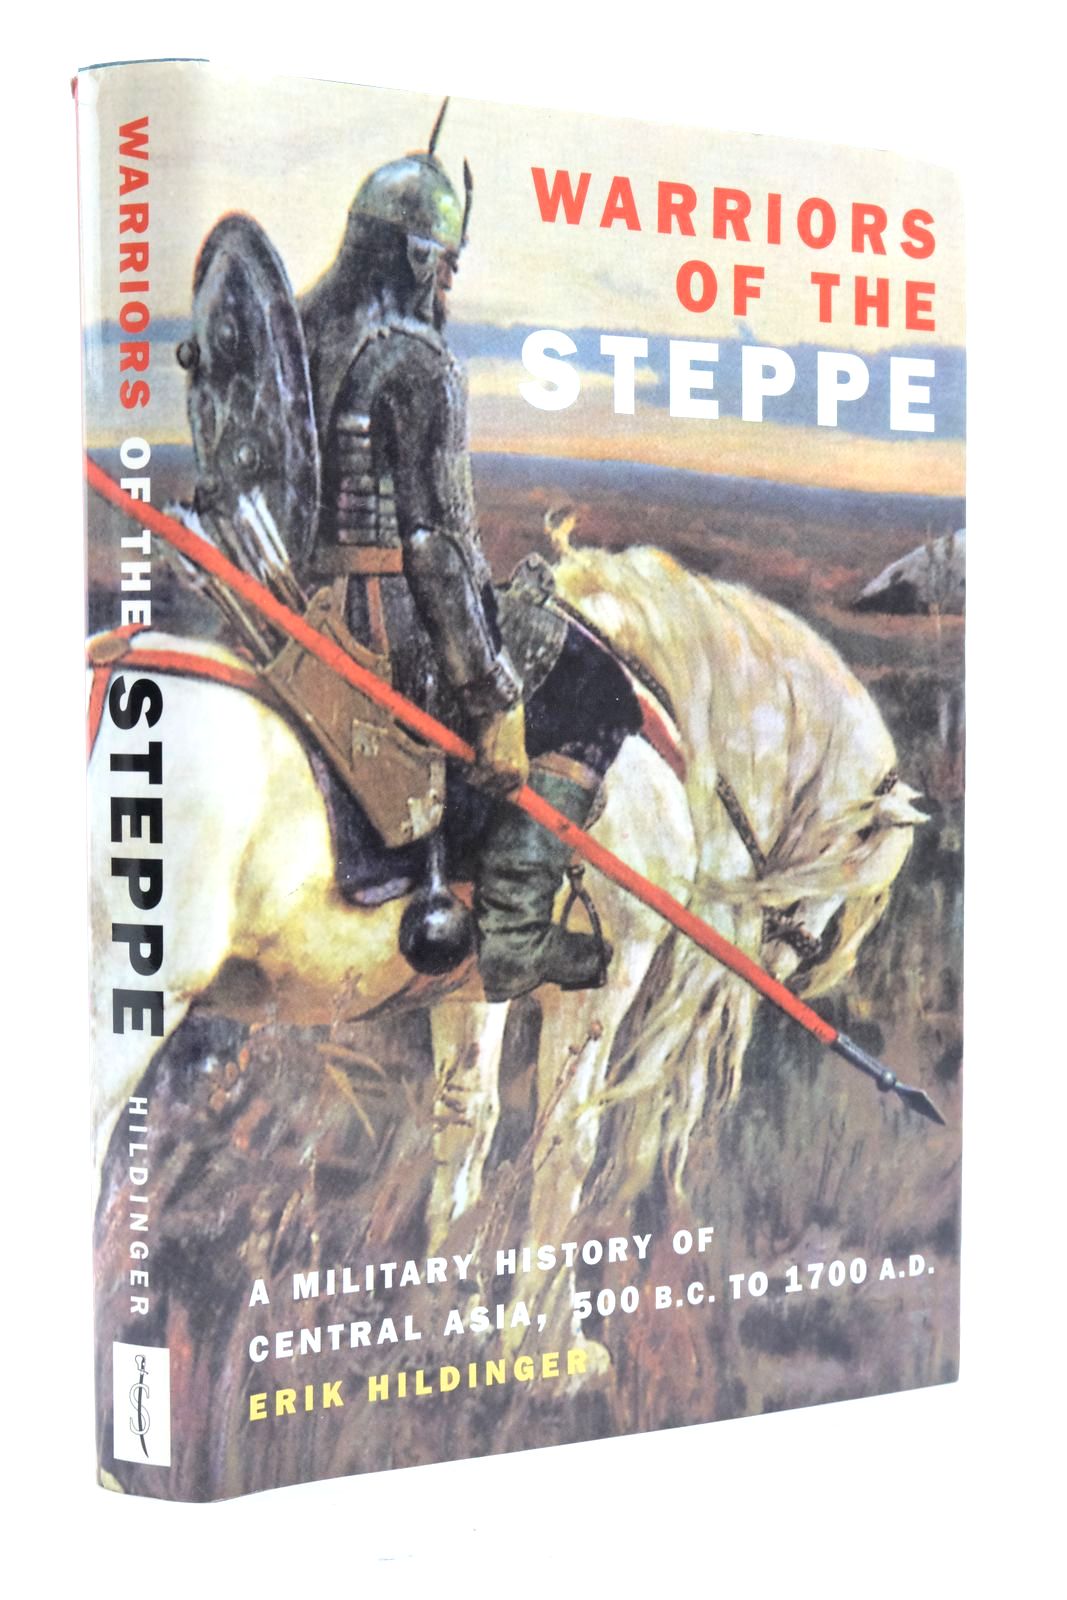 Photo of WARRIORS OF THE STEPPE: A MILITARY HISTOPRY OF CENTRAL ASIA, 500 B.C. TO 1700 A.D. written by Hildinger, Erik published by Spellmount (STOCK CODE: 2137981)  for sale by Stella & Rose's Books